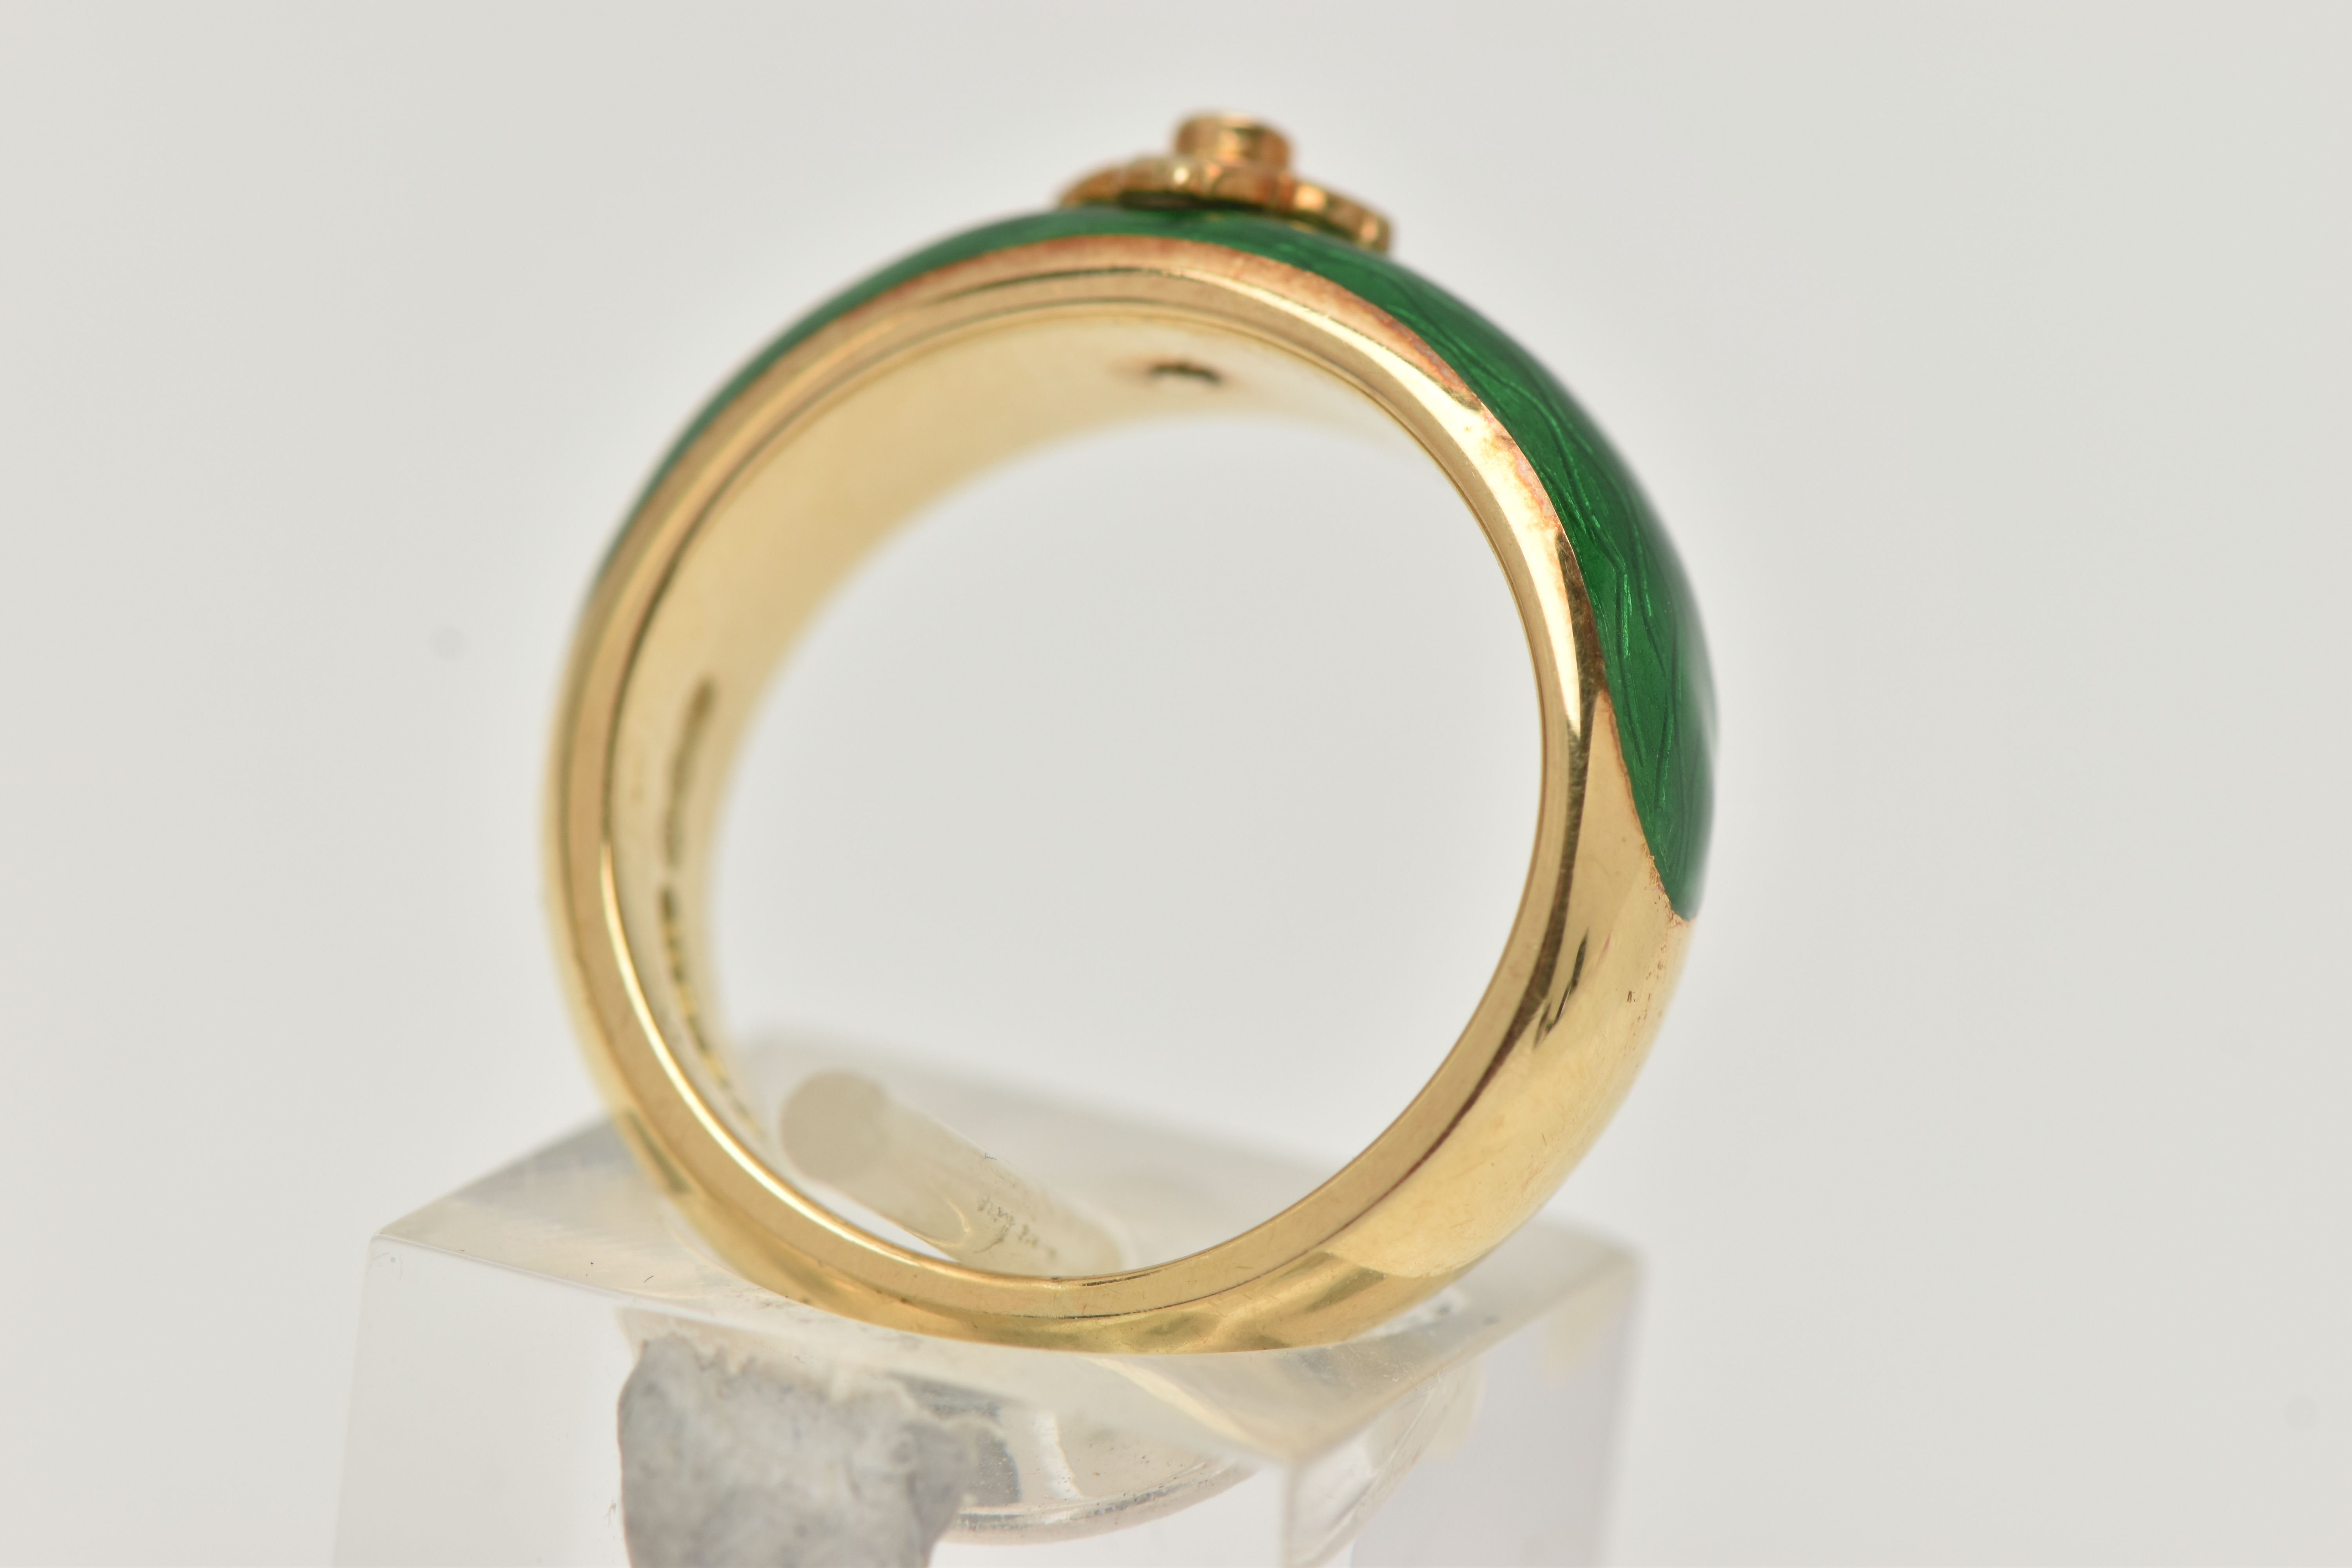 AN 18CT GOLD ENAMEL AND DIAMOND RING, the tapered band with green enamel to the front, a - Image 3 of 6